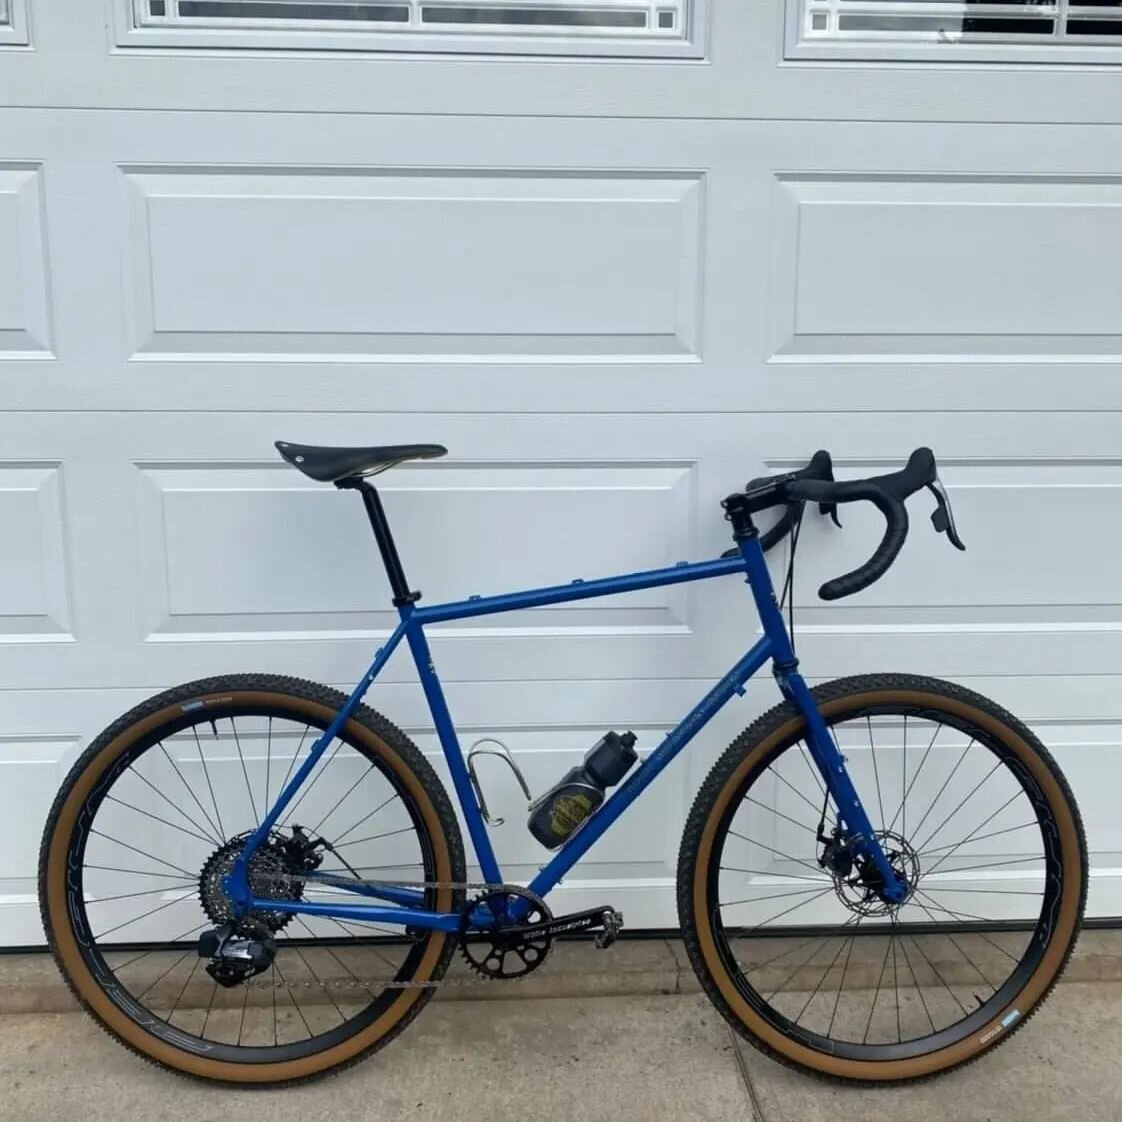 NEW LISTING: HERE WE HAVE A FINE SHOWPIECE FOR THOSE TALL FRIENDS OF MINE.  59cm  @blackmtncycles monster cross. 

Featuring Force AXS XPLR group. Paul brakes/stem/post. Enve gravel bars. White Industries. cranks and BB.  HED Belgium Gs laced wheels 